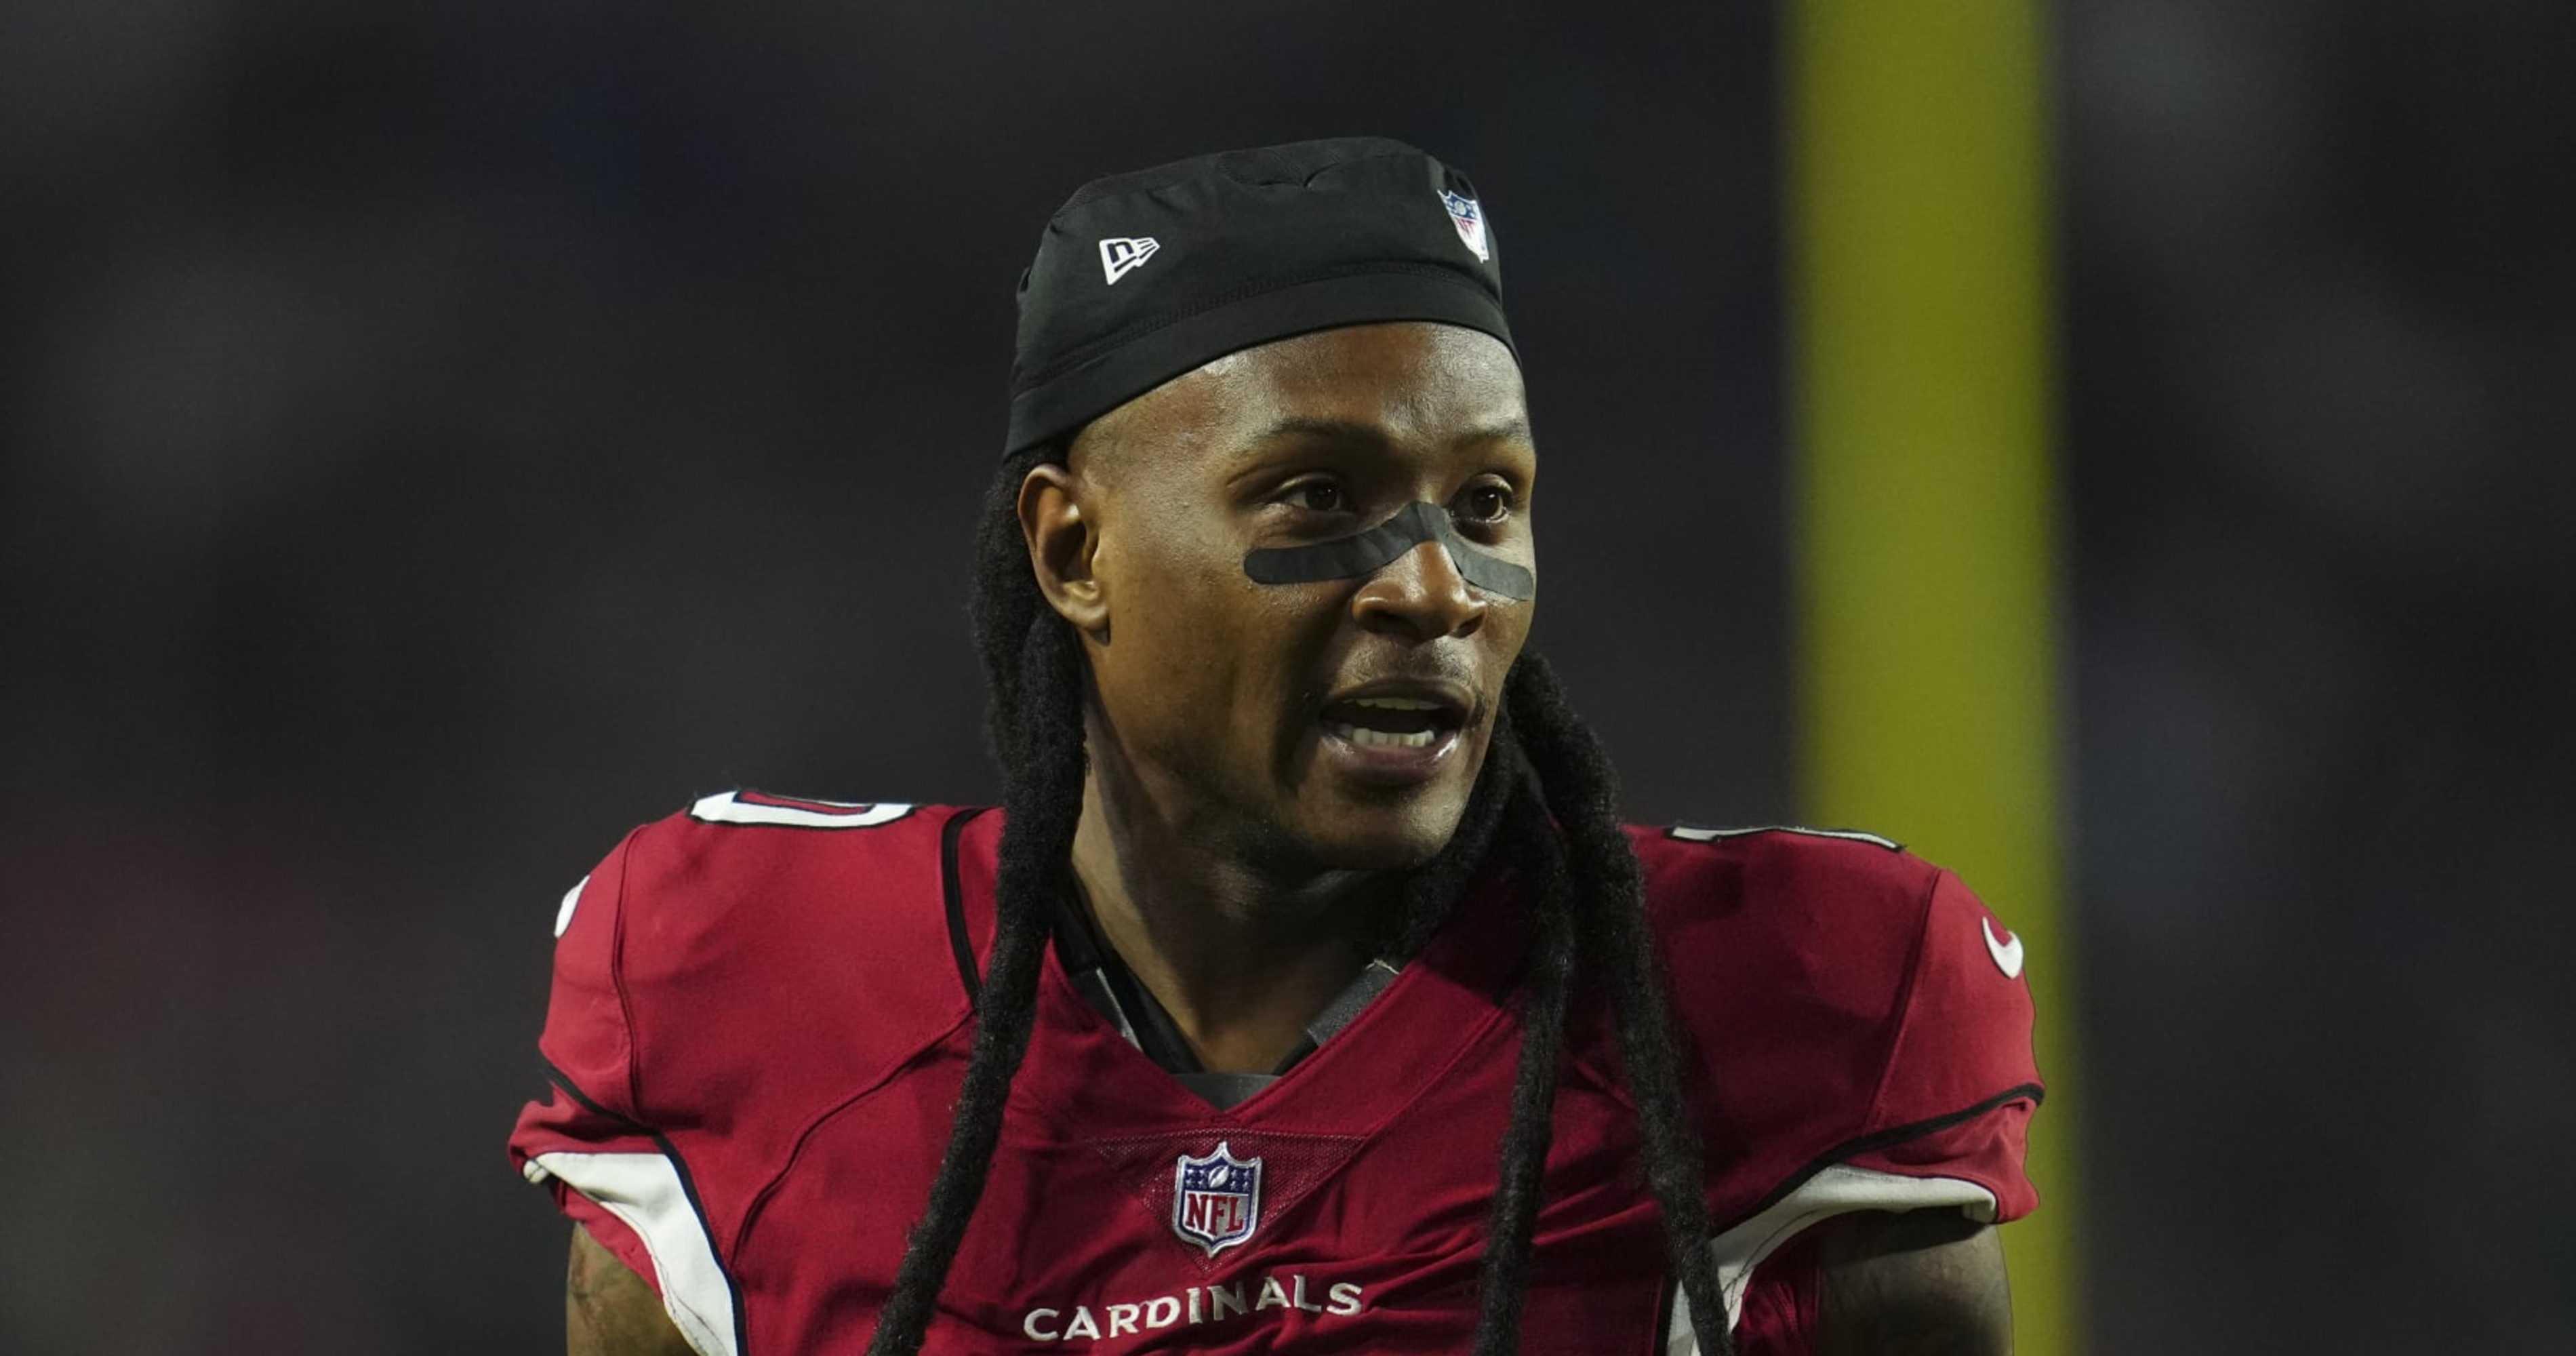 DeAndre Hopkins brings some important experience to the Titans roster.